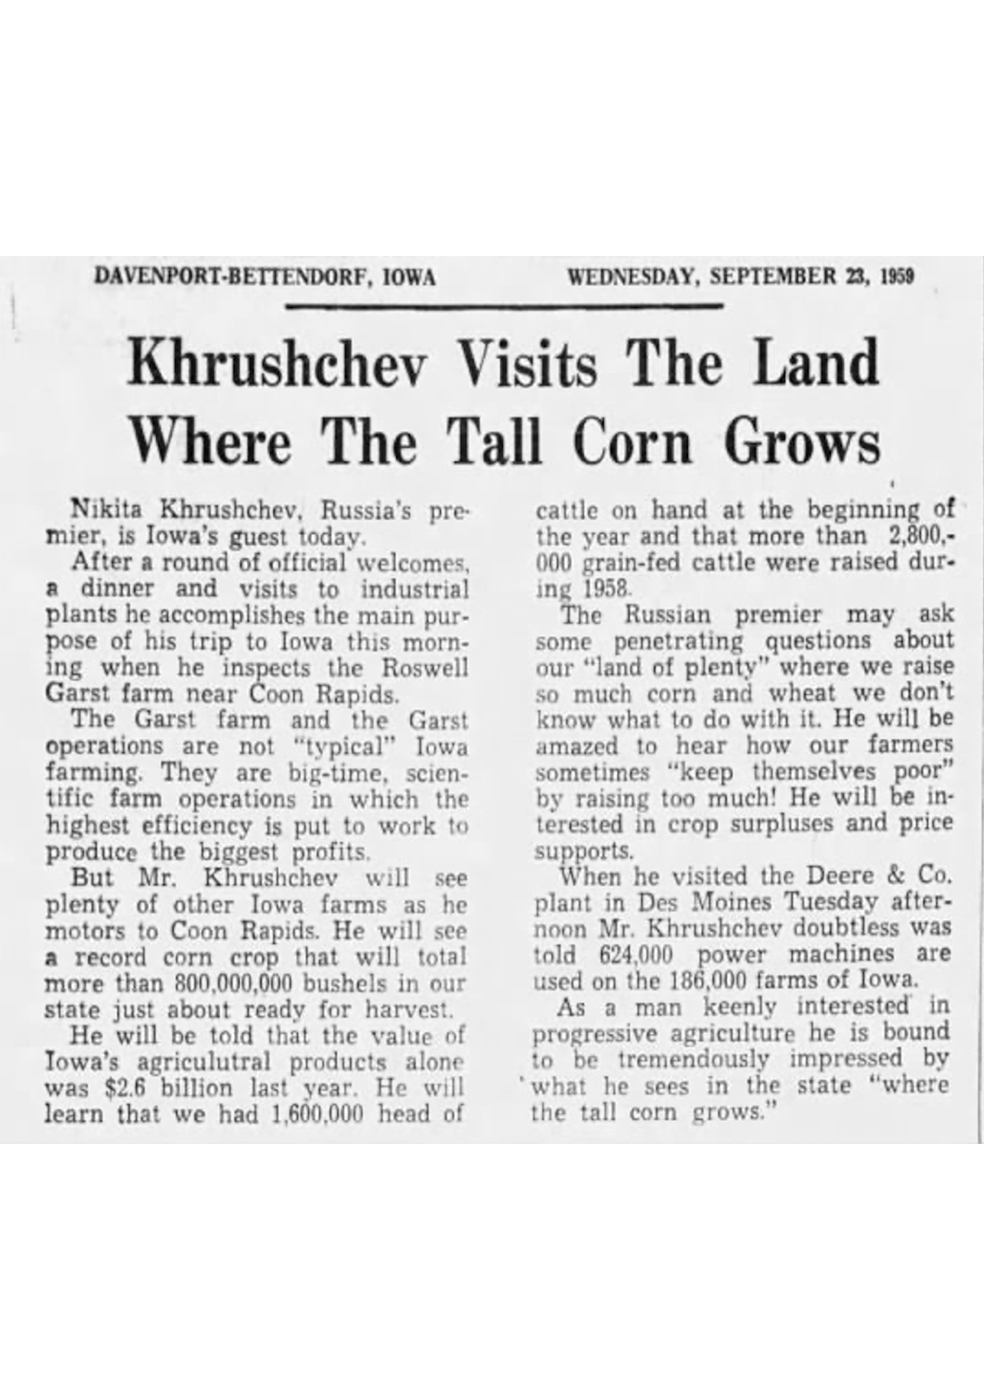 Krushchev Visits the Land Where the Tall Corn Grows